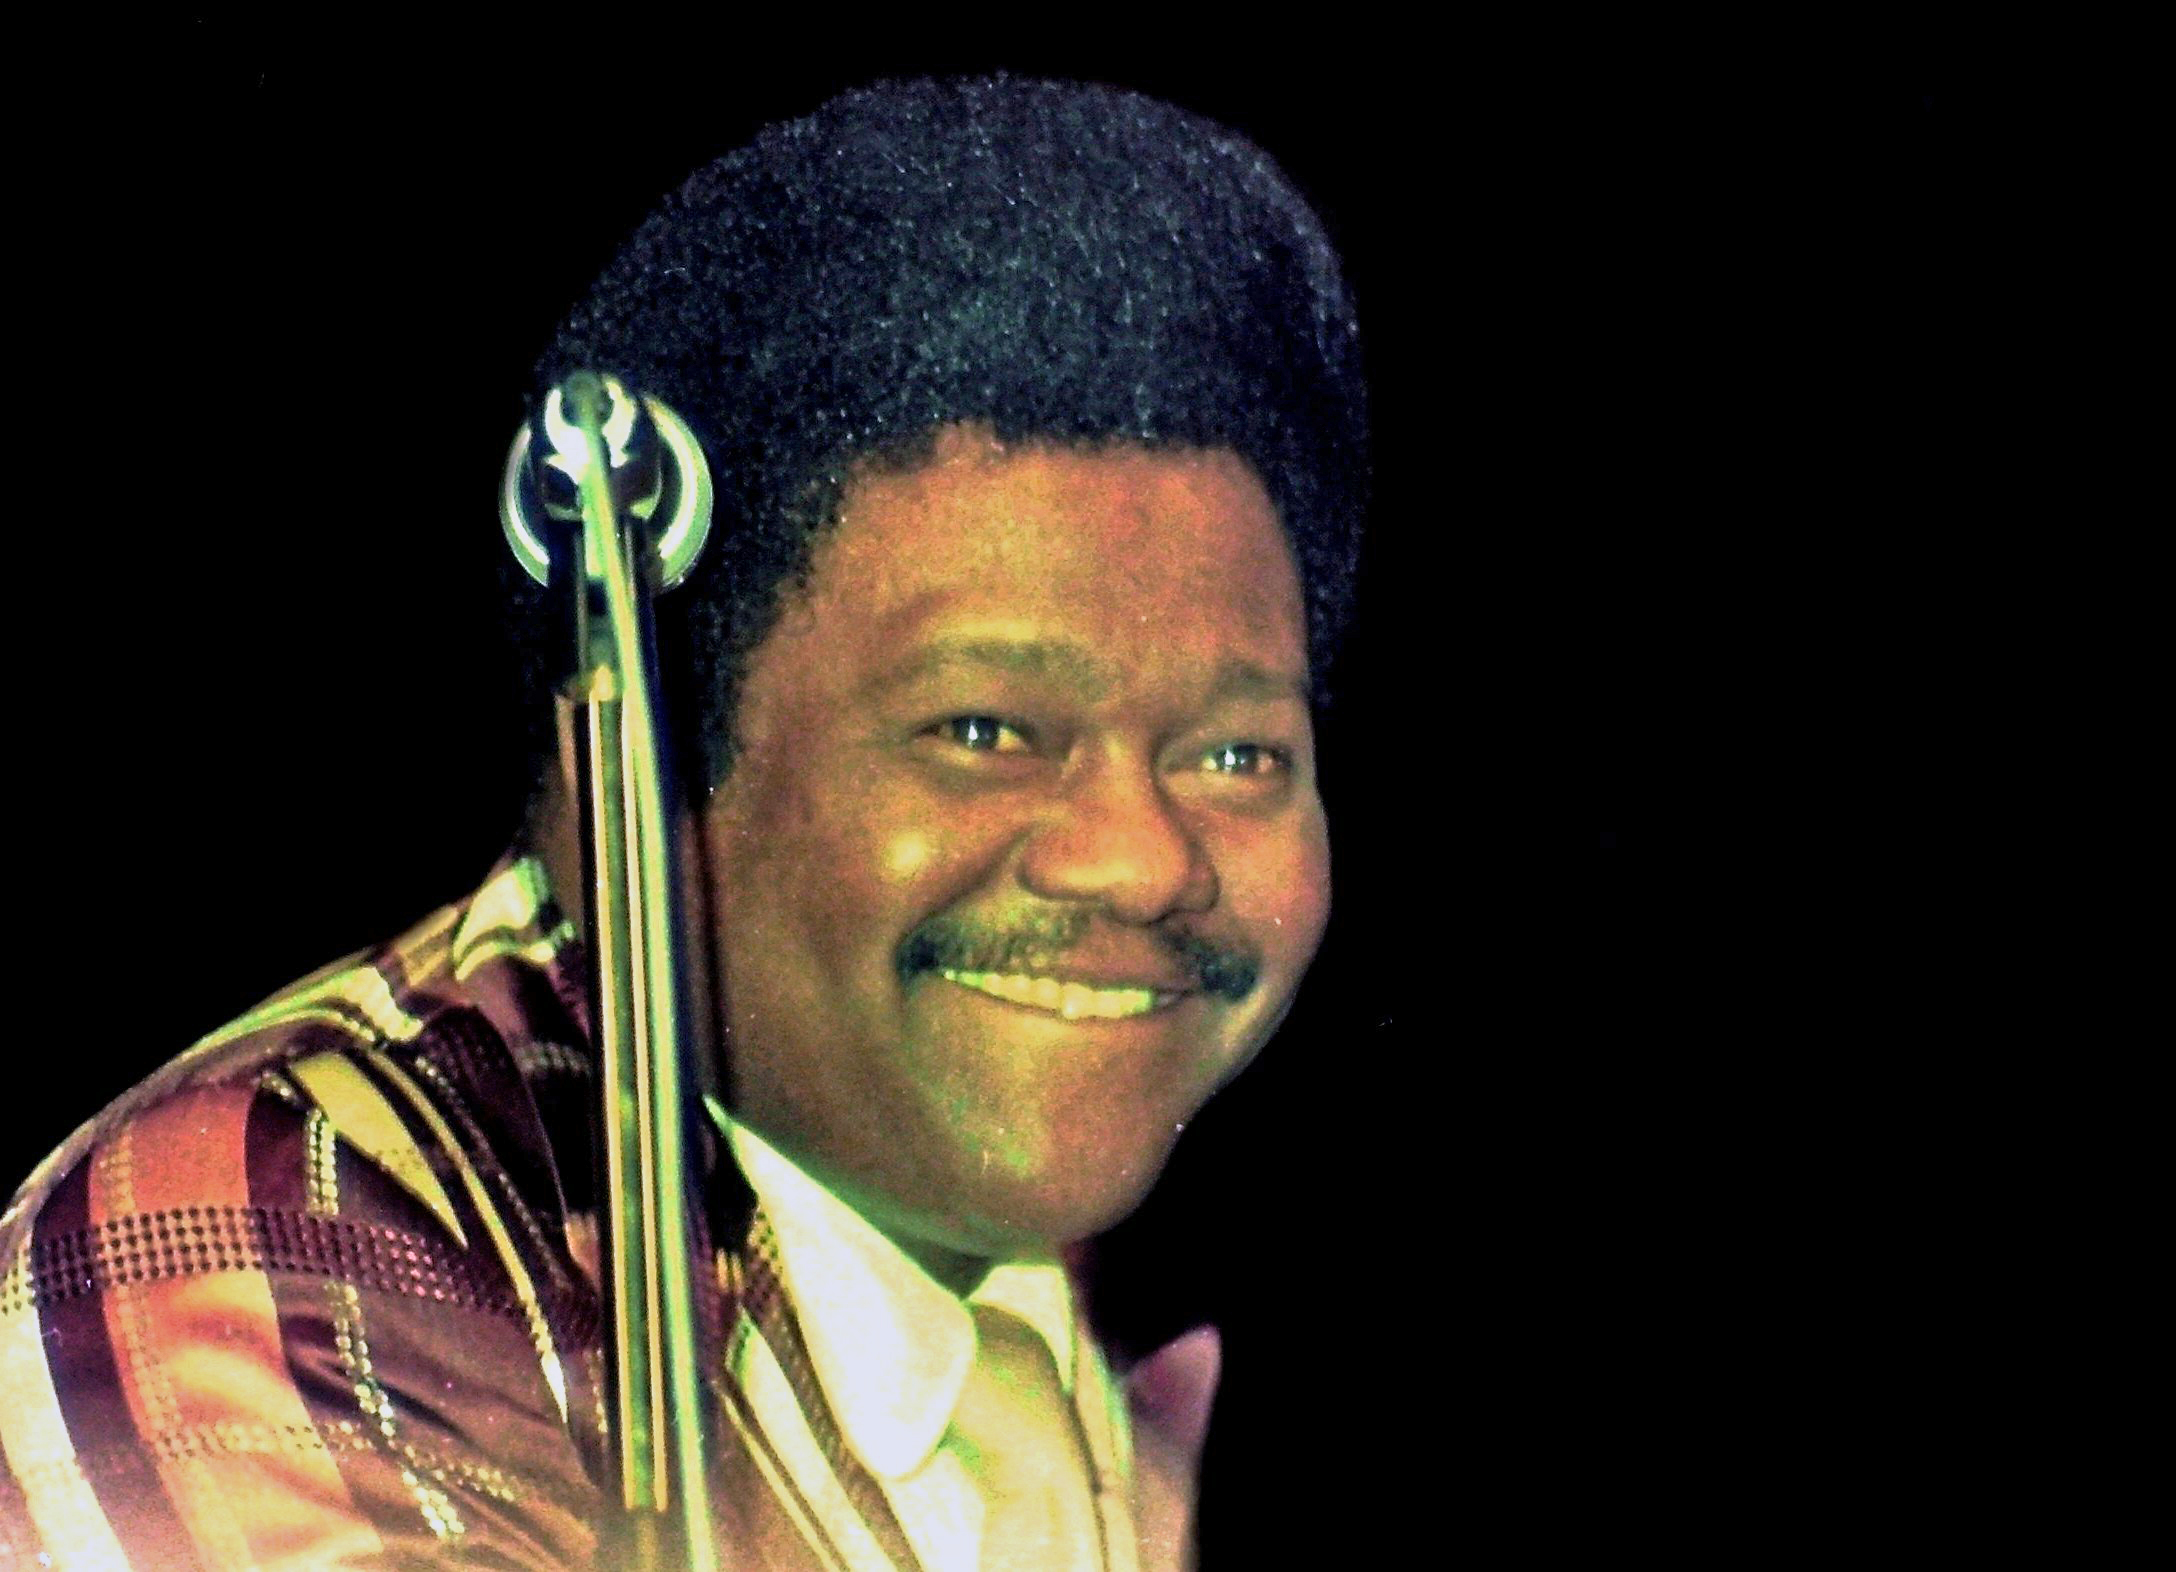 BARRY LEVINE: Fats Domino’s now the dean of rockers | Arts & Entertainment | albanyherald.com